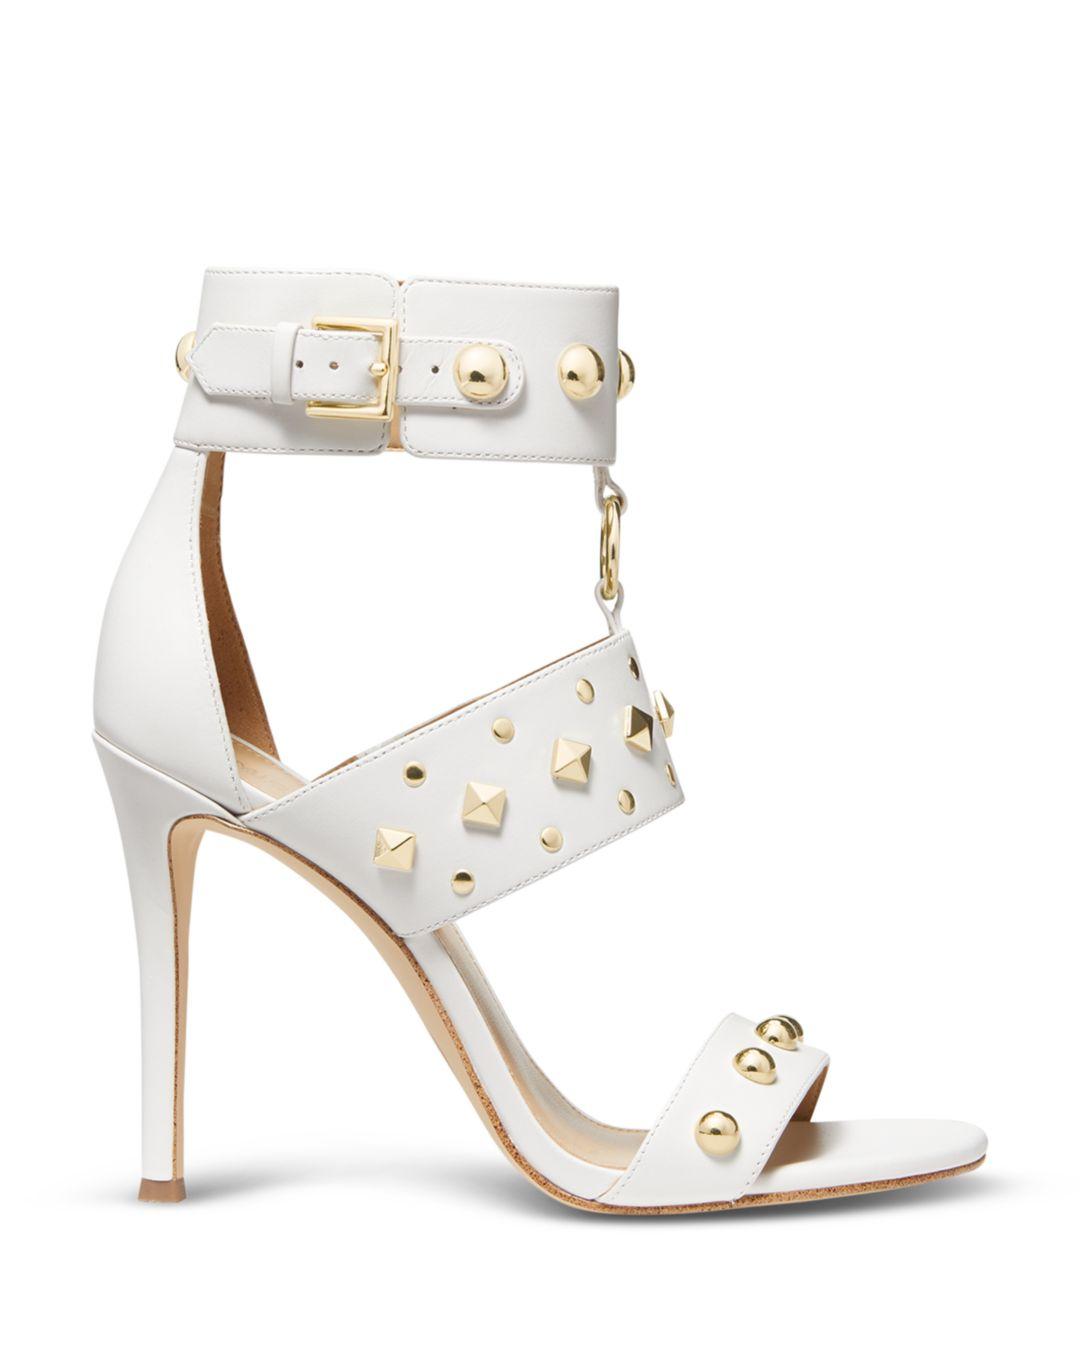 MICHAEL Michael Kors Amos Ankle Strap High Heel Sandals in White | Lyst